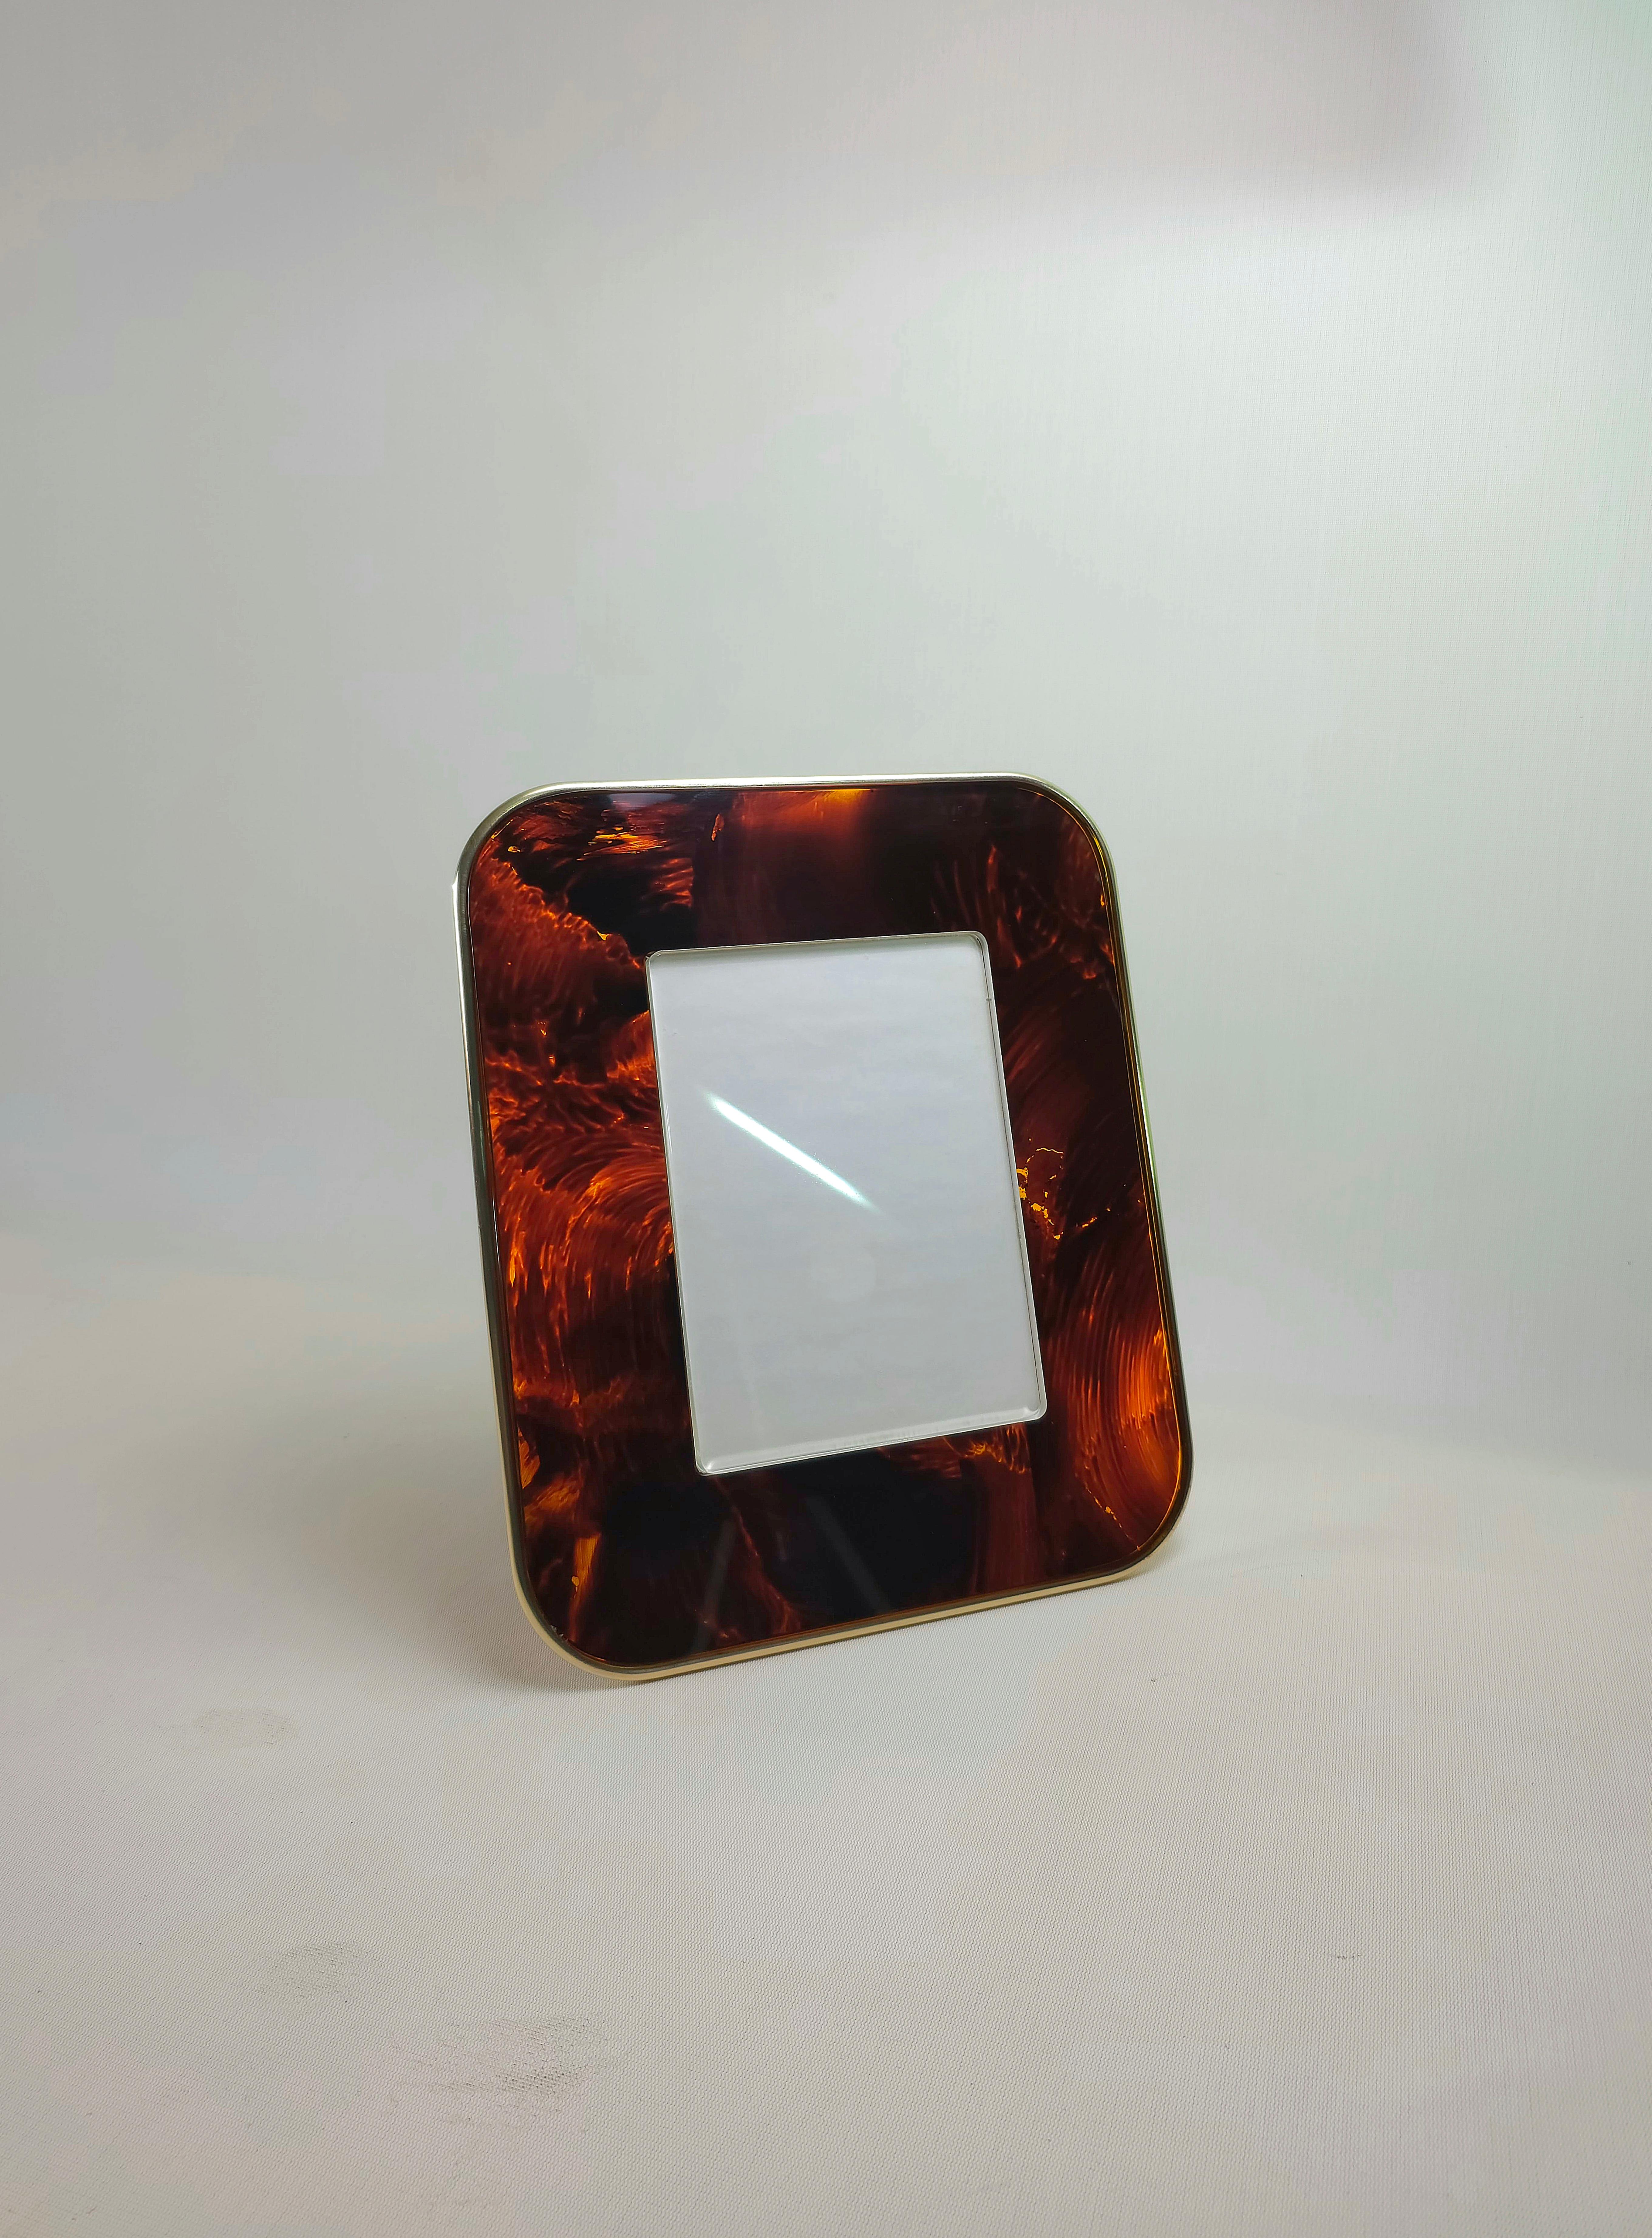 Tortoise Lucite Picture Frame Midcentury Design Italy 70s  Brass Border For Sale 4